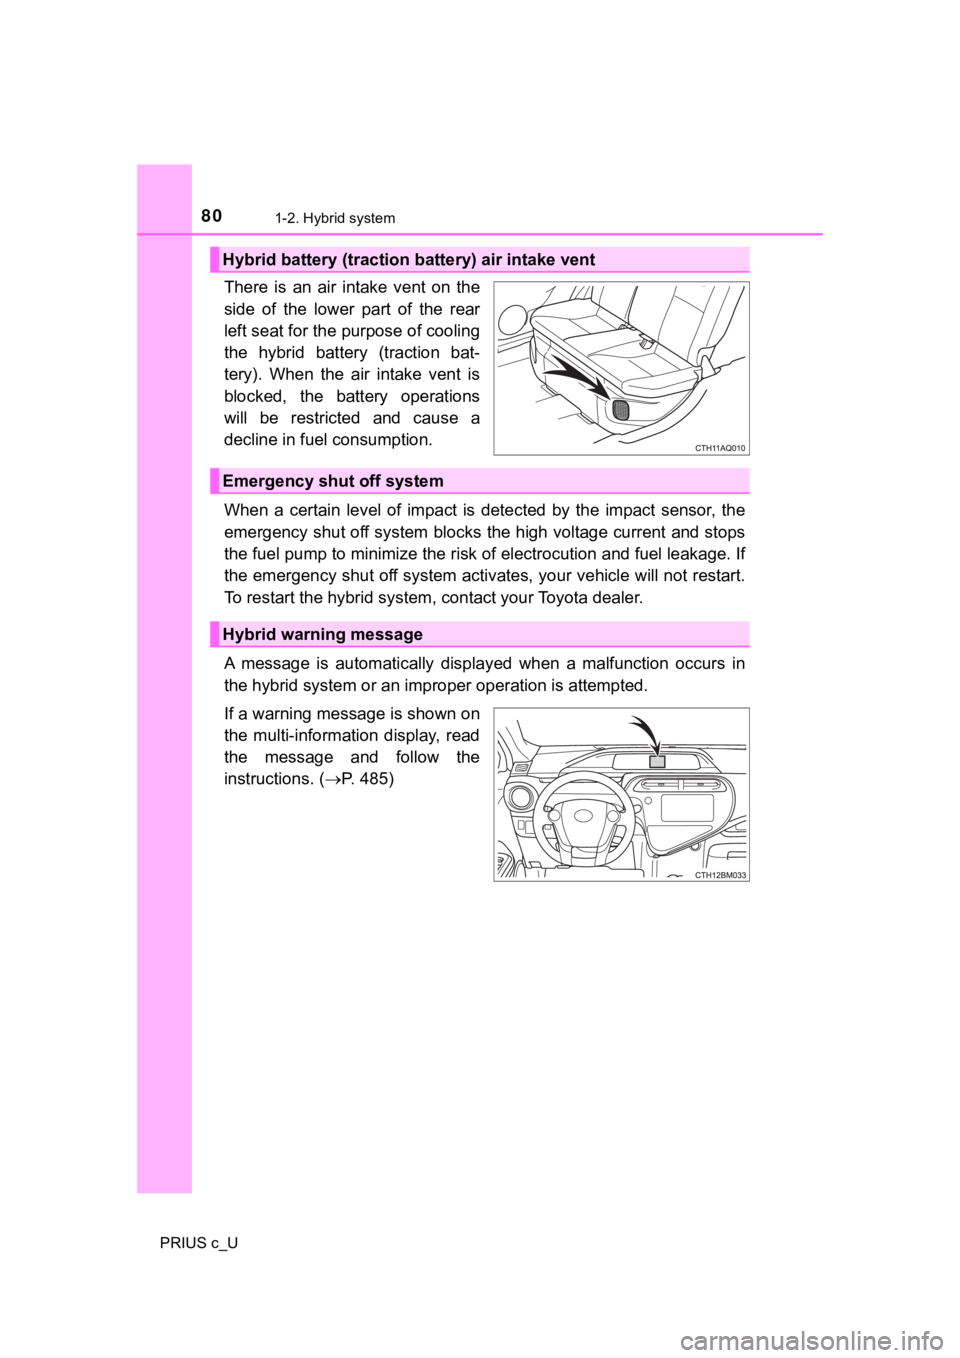 TOYOTA PRIUS C 2019  Owners Manual (in English) 801-2. Hybrid system
PRIUS c_U
There  is  an  air  intake  vent  on  the
side  of  the  lower  part  of  the  rear
left seat for the purpose of cooling
the  hybrid  battery  (traction  bat-
tery).  Wh